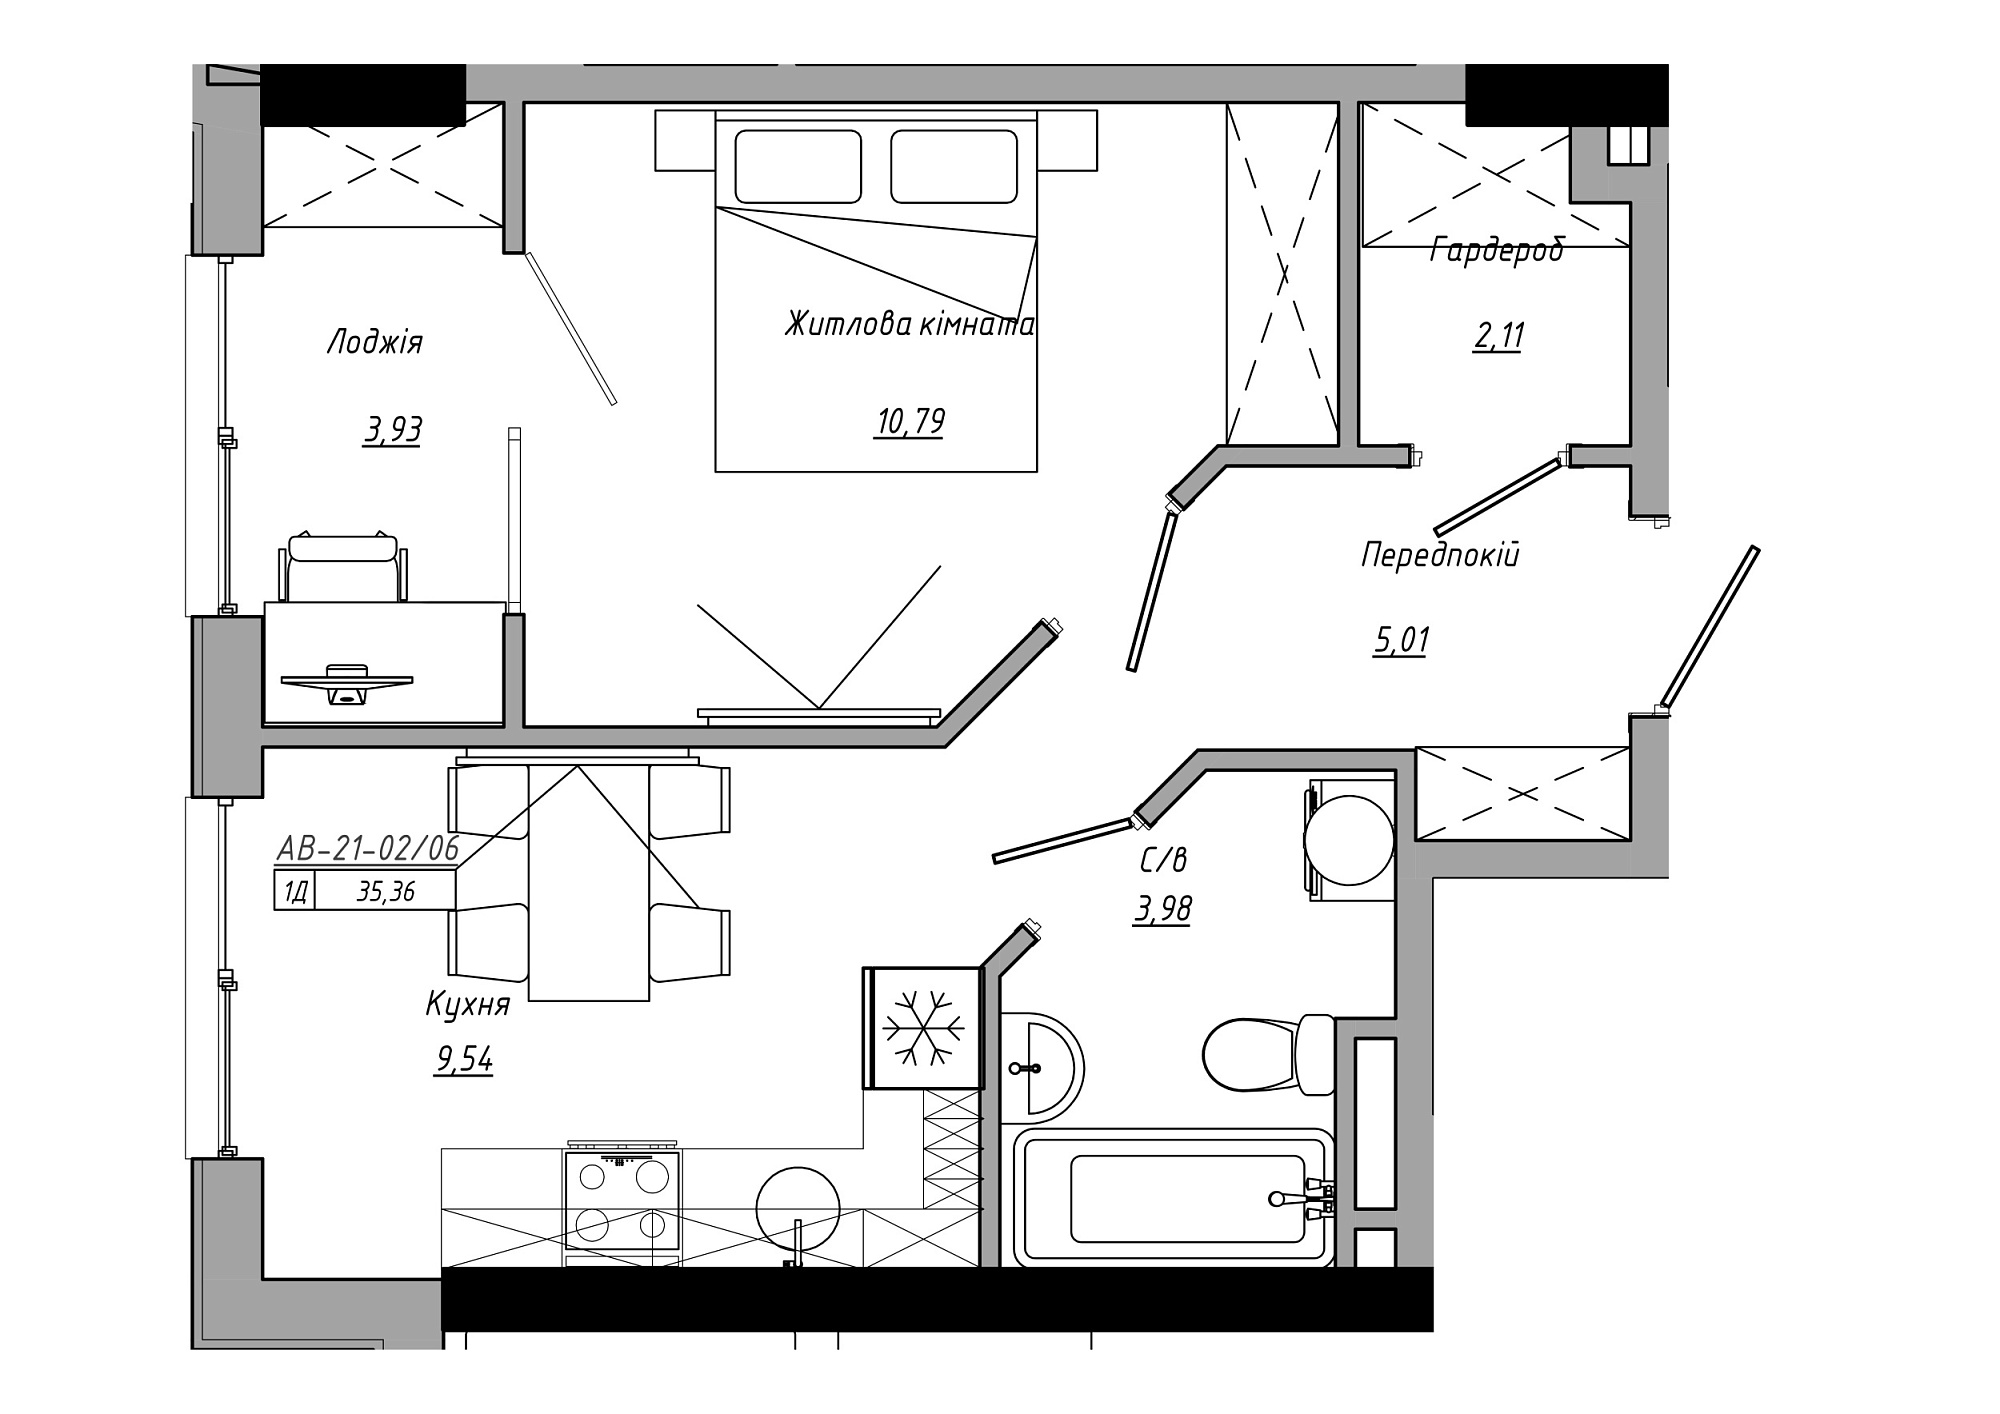 Planning 1-rm flats area 35.36m2, AB-21-02/00006.